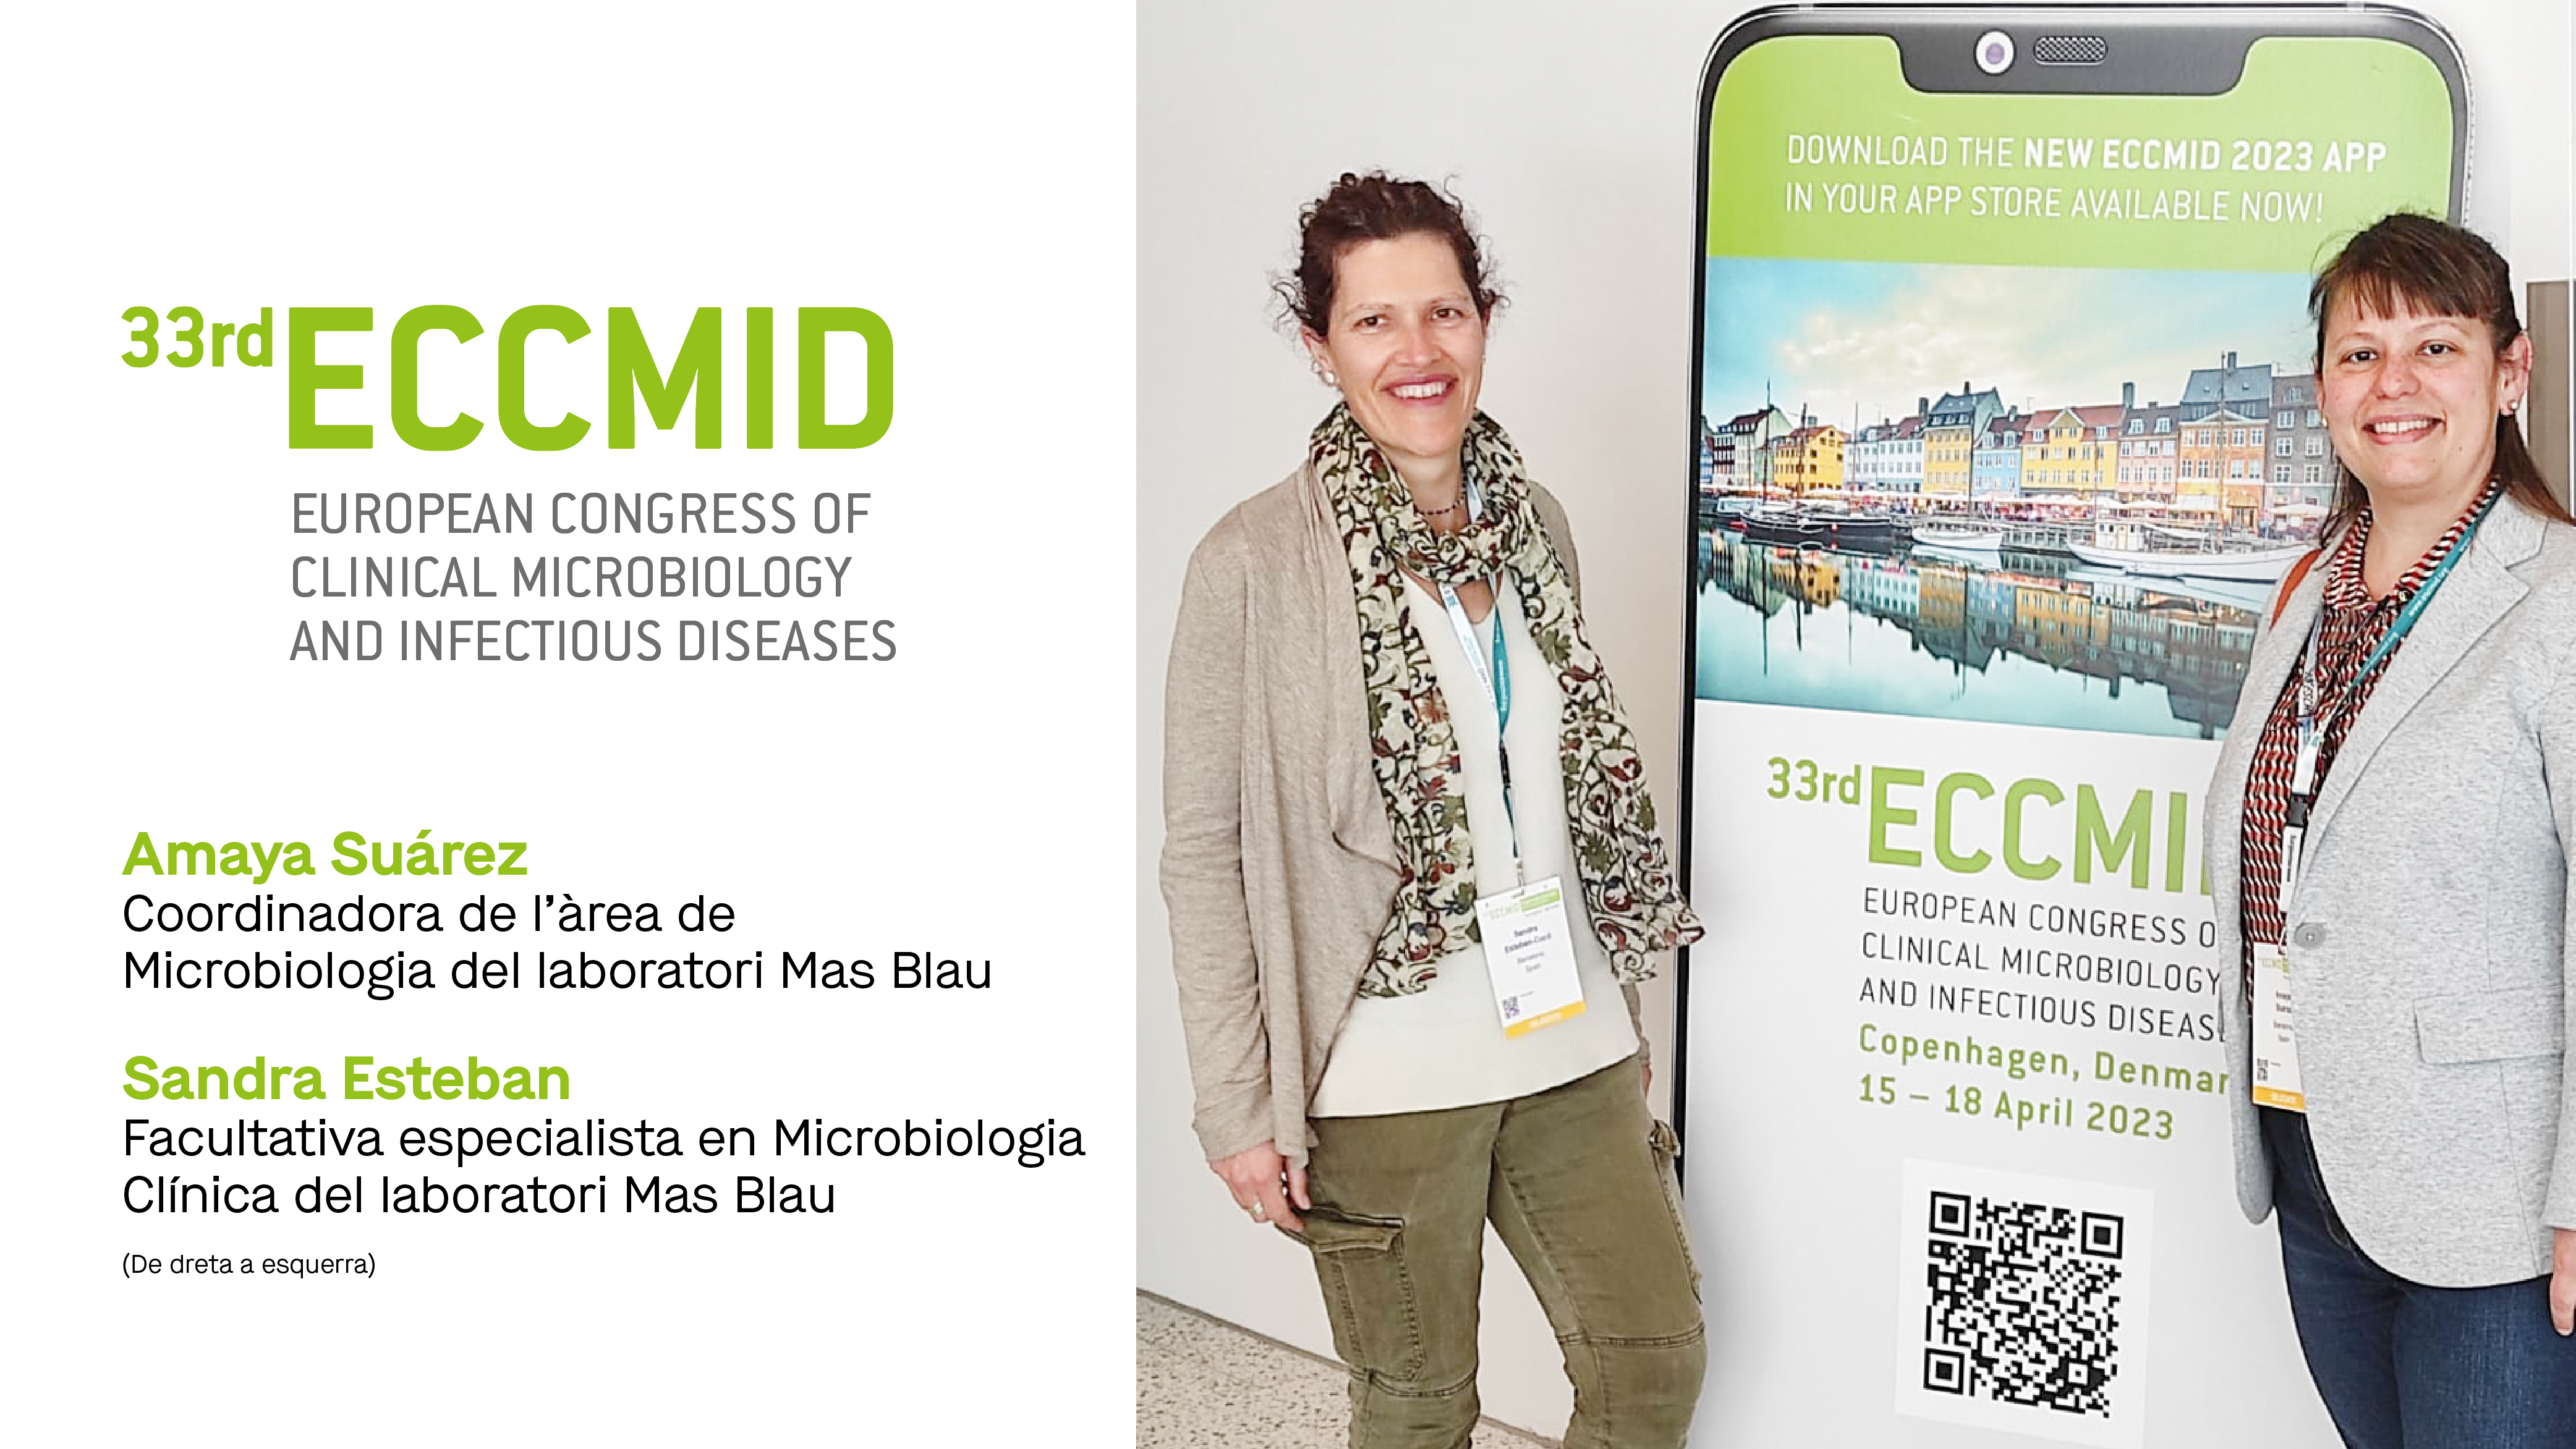 014_33rd European Congress of Clinical Microbiology and Infectious Diseases (ECCMID) 